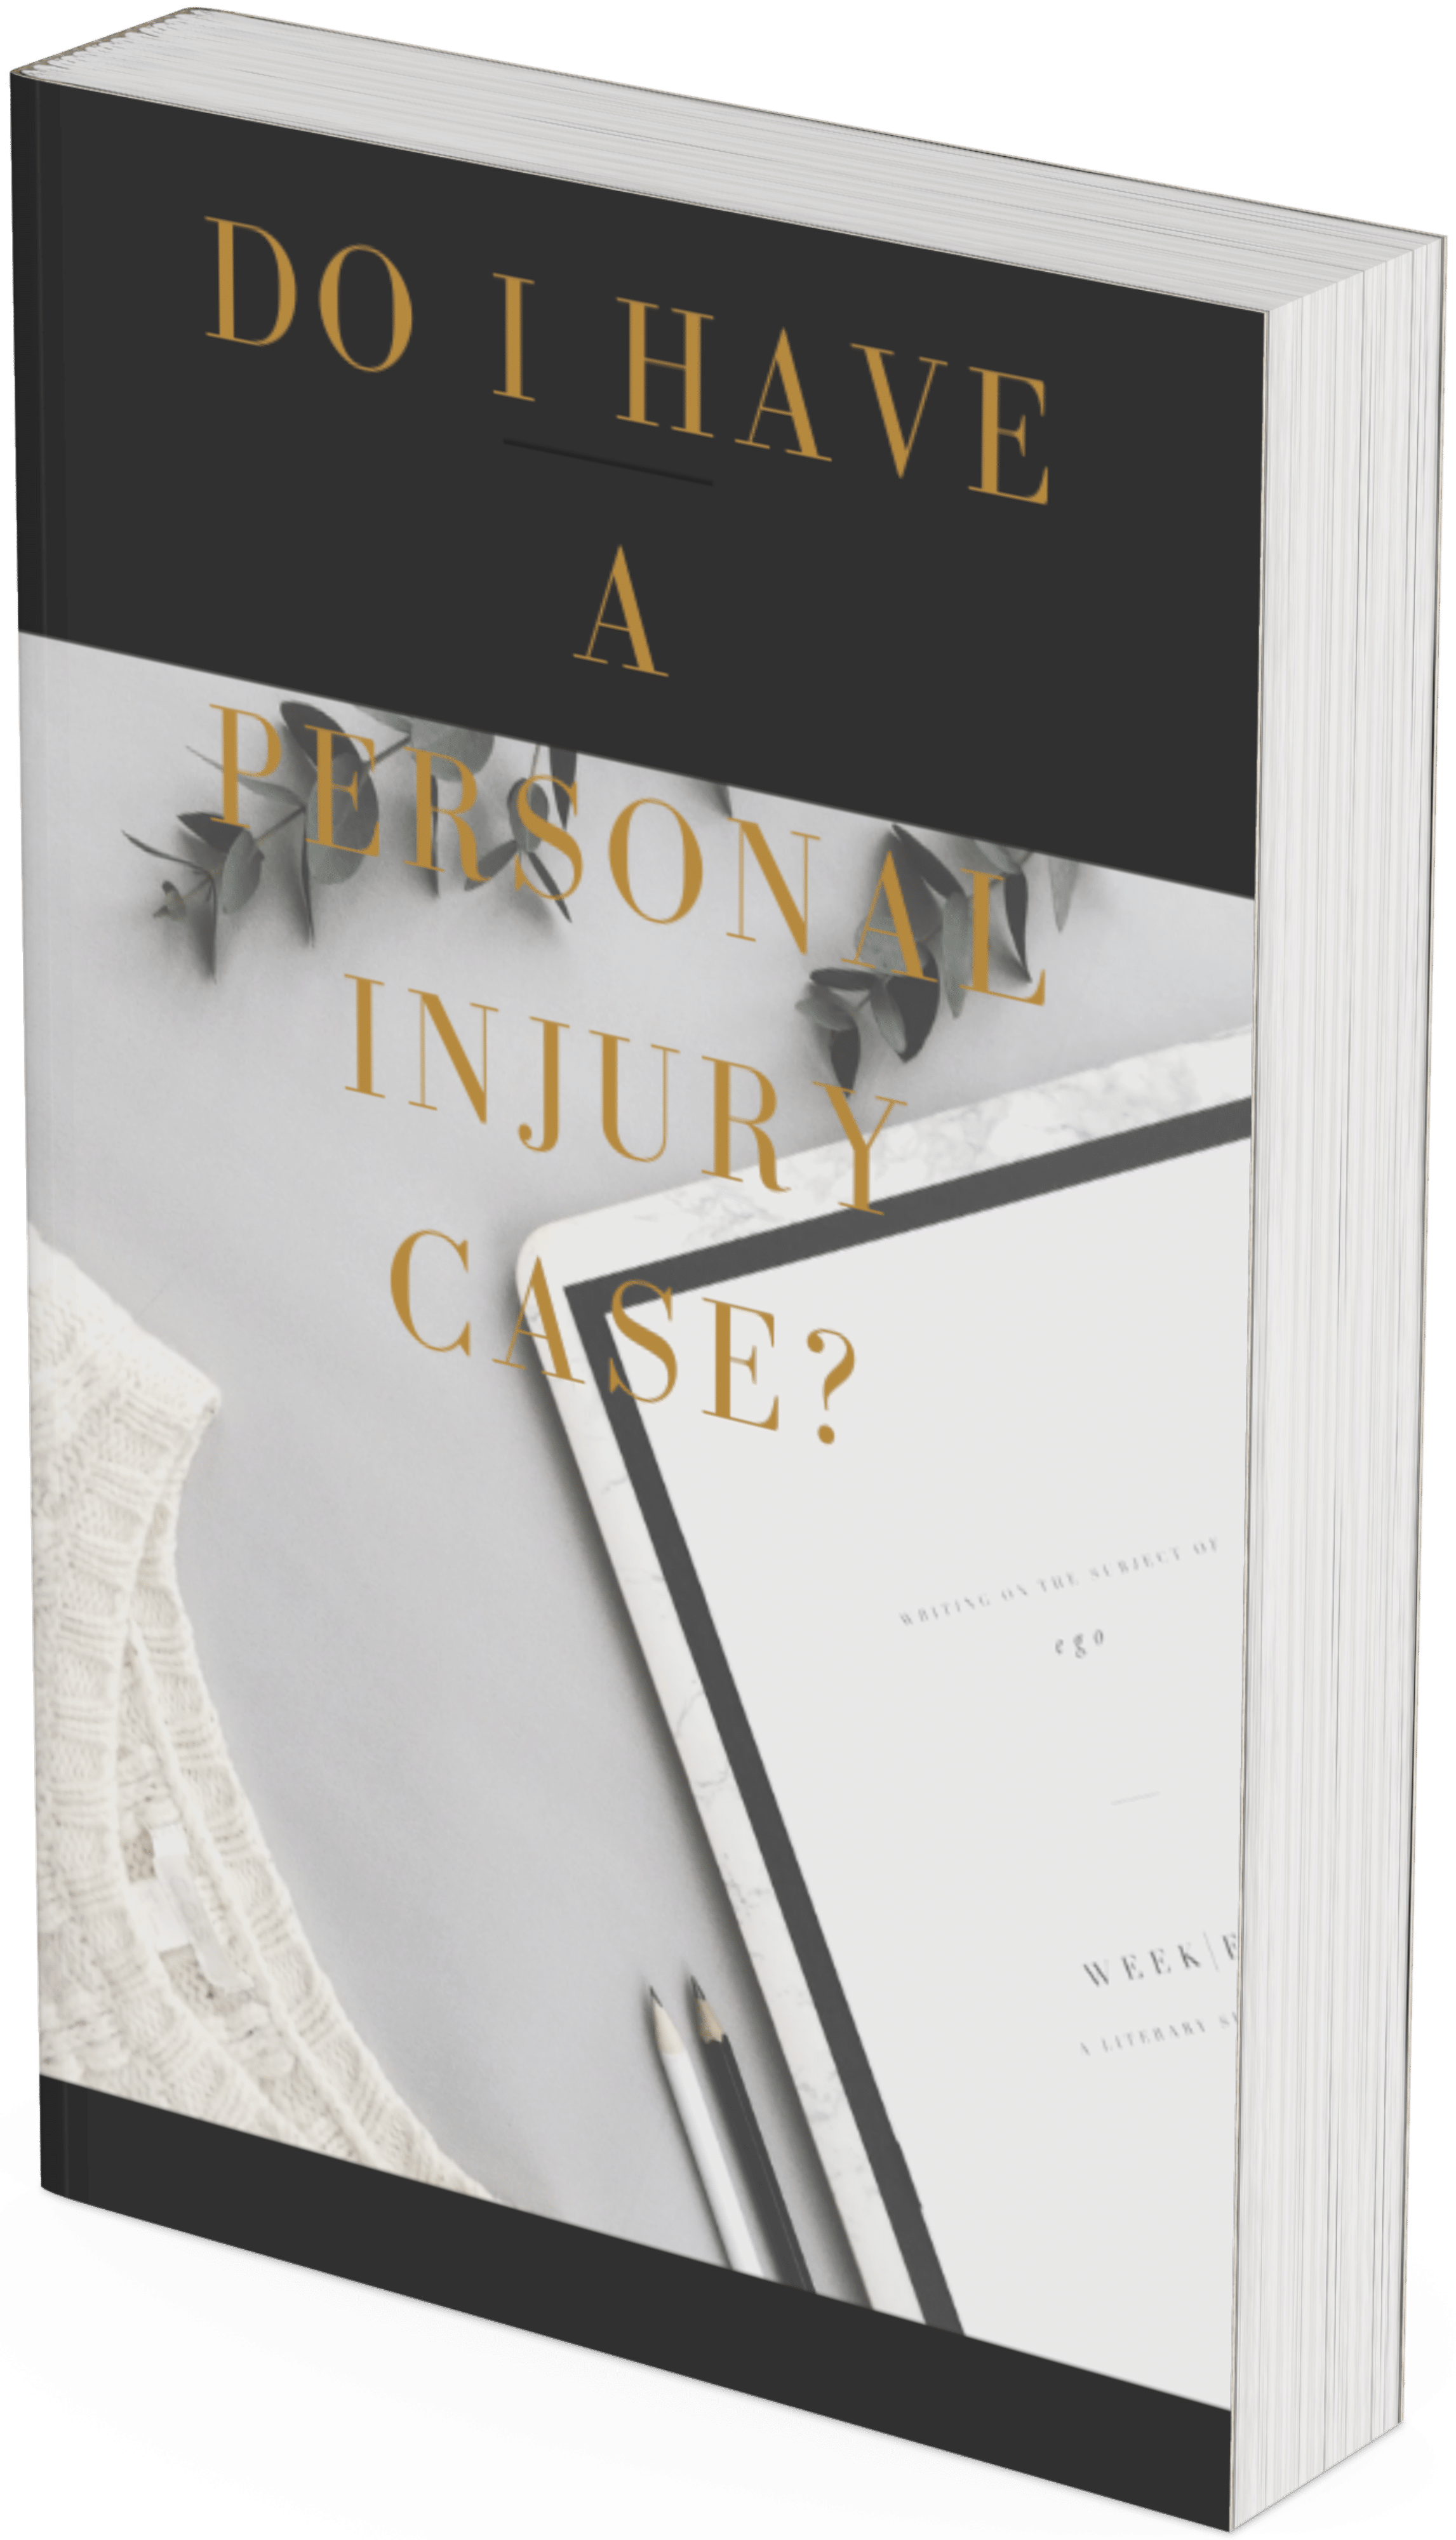 Do I Have A Personal Injury Case?